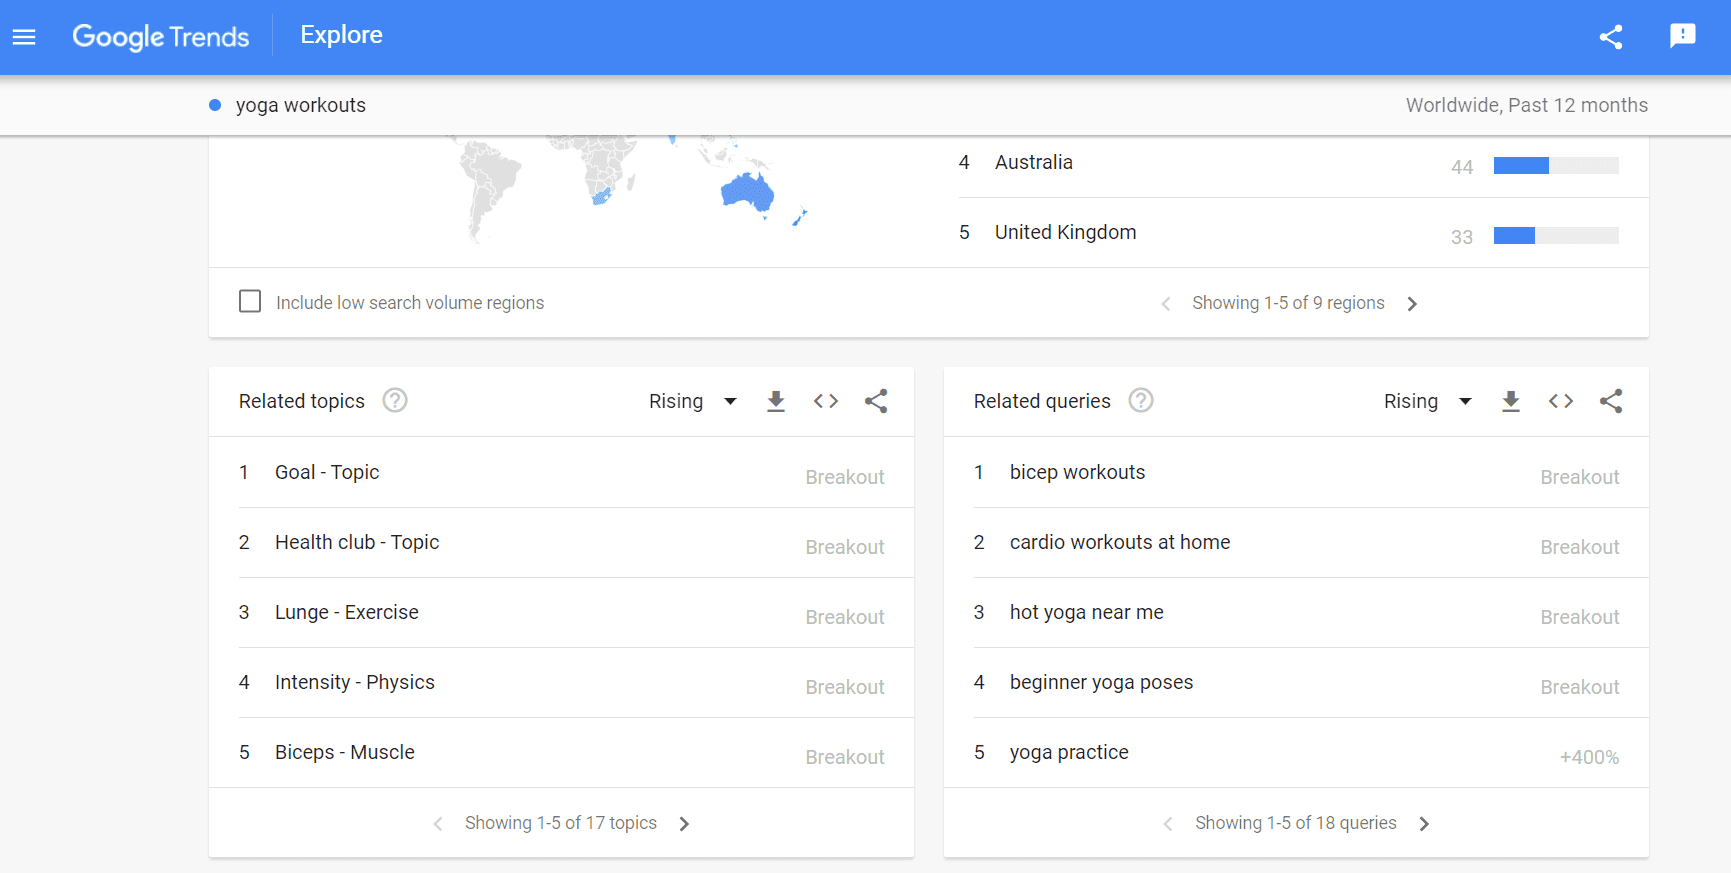 Google Trends report showing related topics and queries for a search term